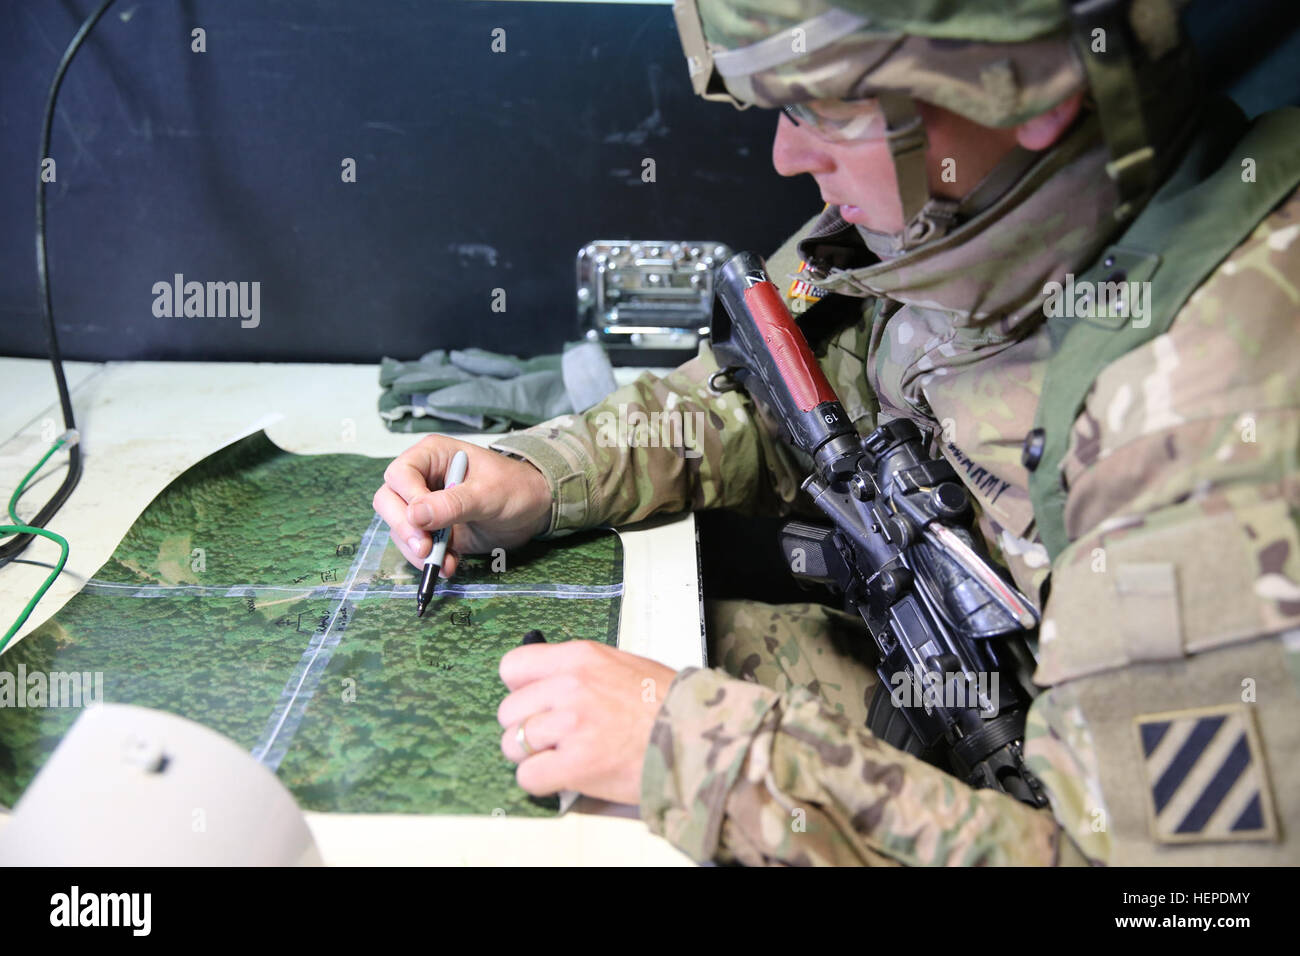 A U.S. Soldier assigned to the 1st Battalion, 41st Field Artillery Regiment, 1st Armored Brigade Combat Team 3rd Infantry Division plots points on a map in a tactical operations center during exercise Combined Resolve IV at the U.S. Army’s Joint Multinational Readiness Center in Hohenfels, Germany, May 27, 2015. Combined Resolve IV is an Army Europe directed exercise training a multinational brigade and enhancing interoperability with allies and partner nations. Combined Resolve trains on unified land operations against a complex threat while improving the combat readiness of all participants. Stock Photo